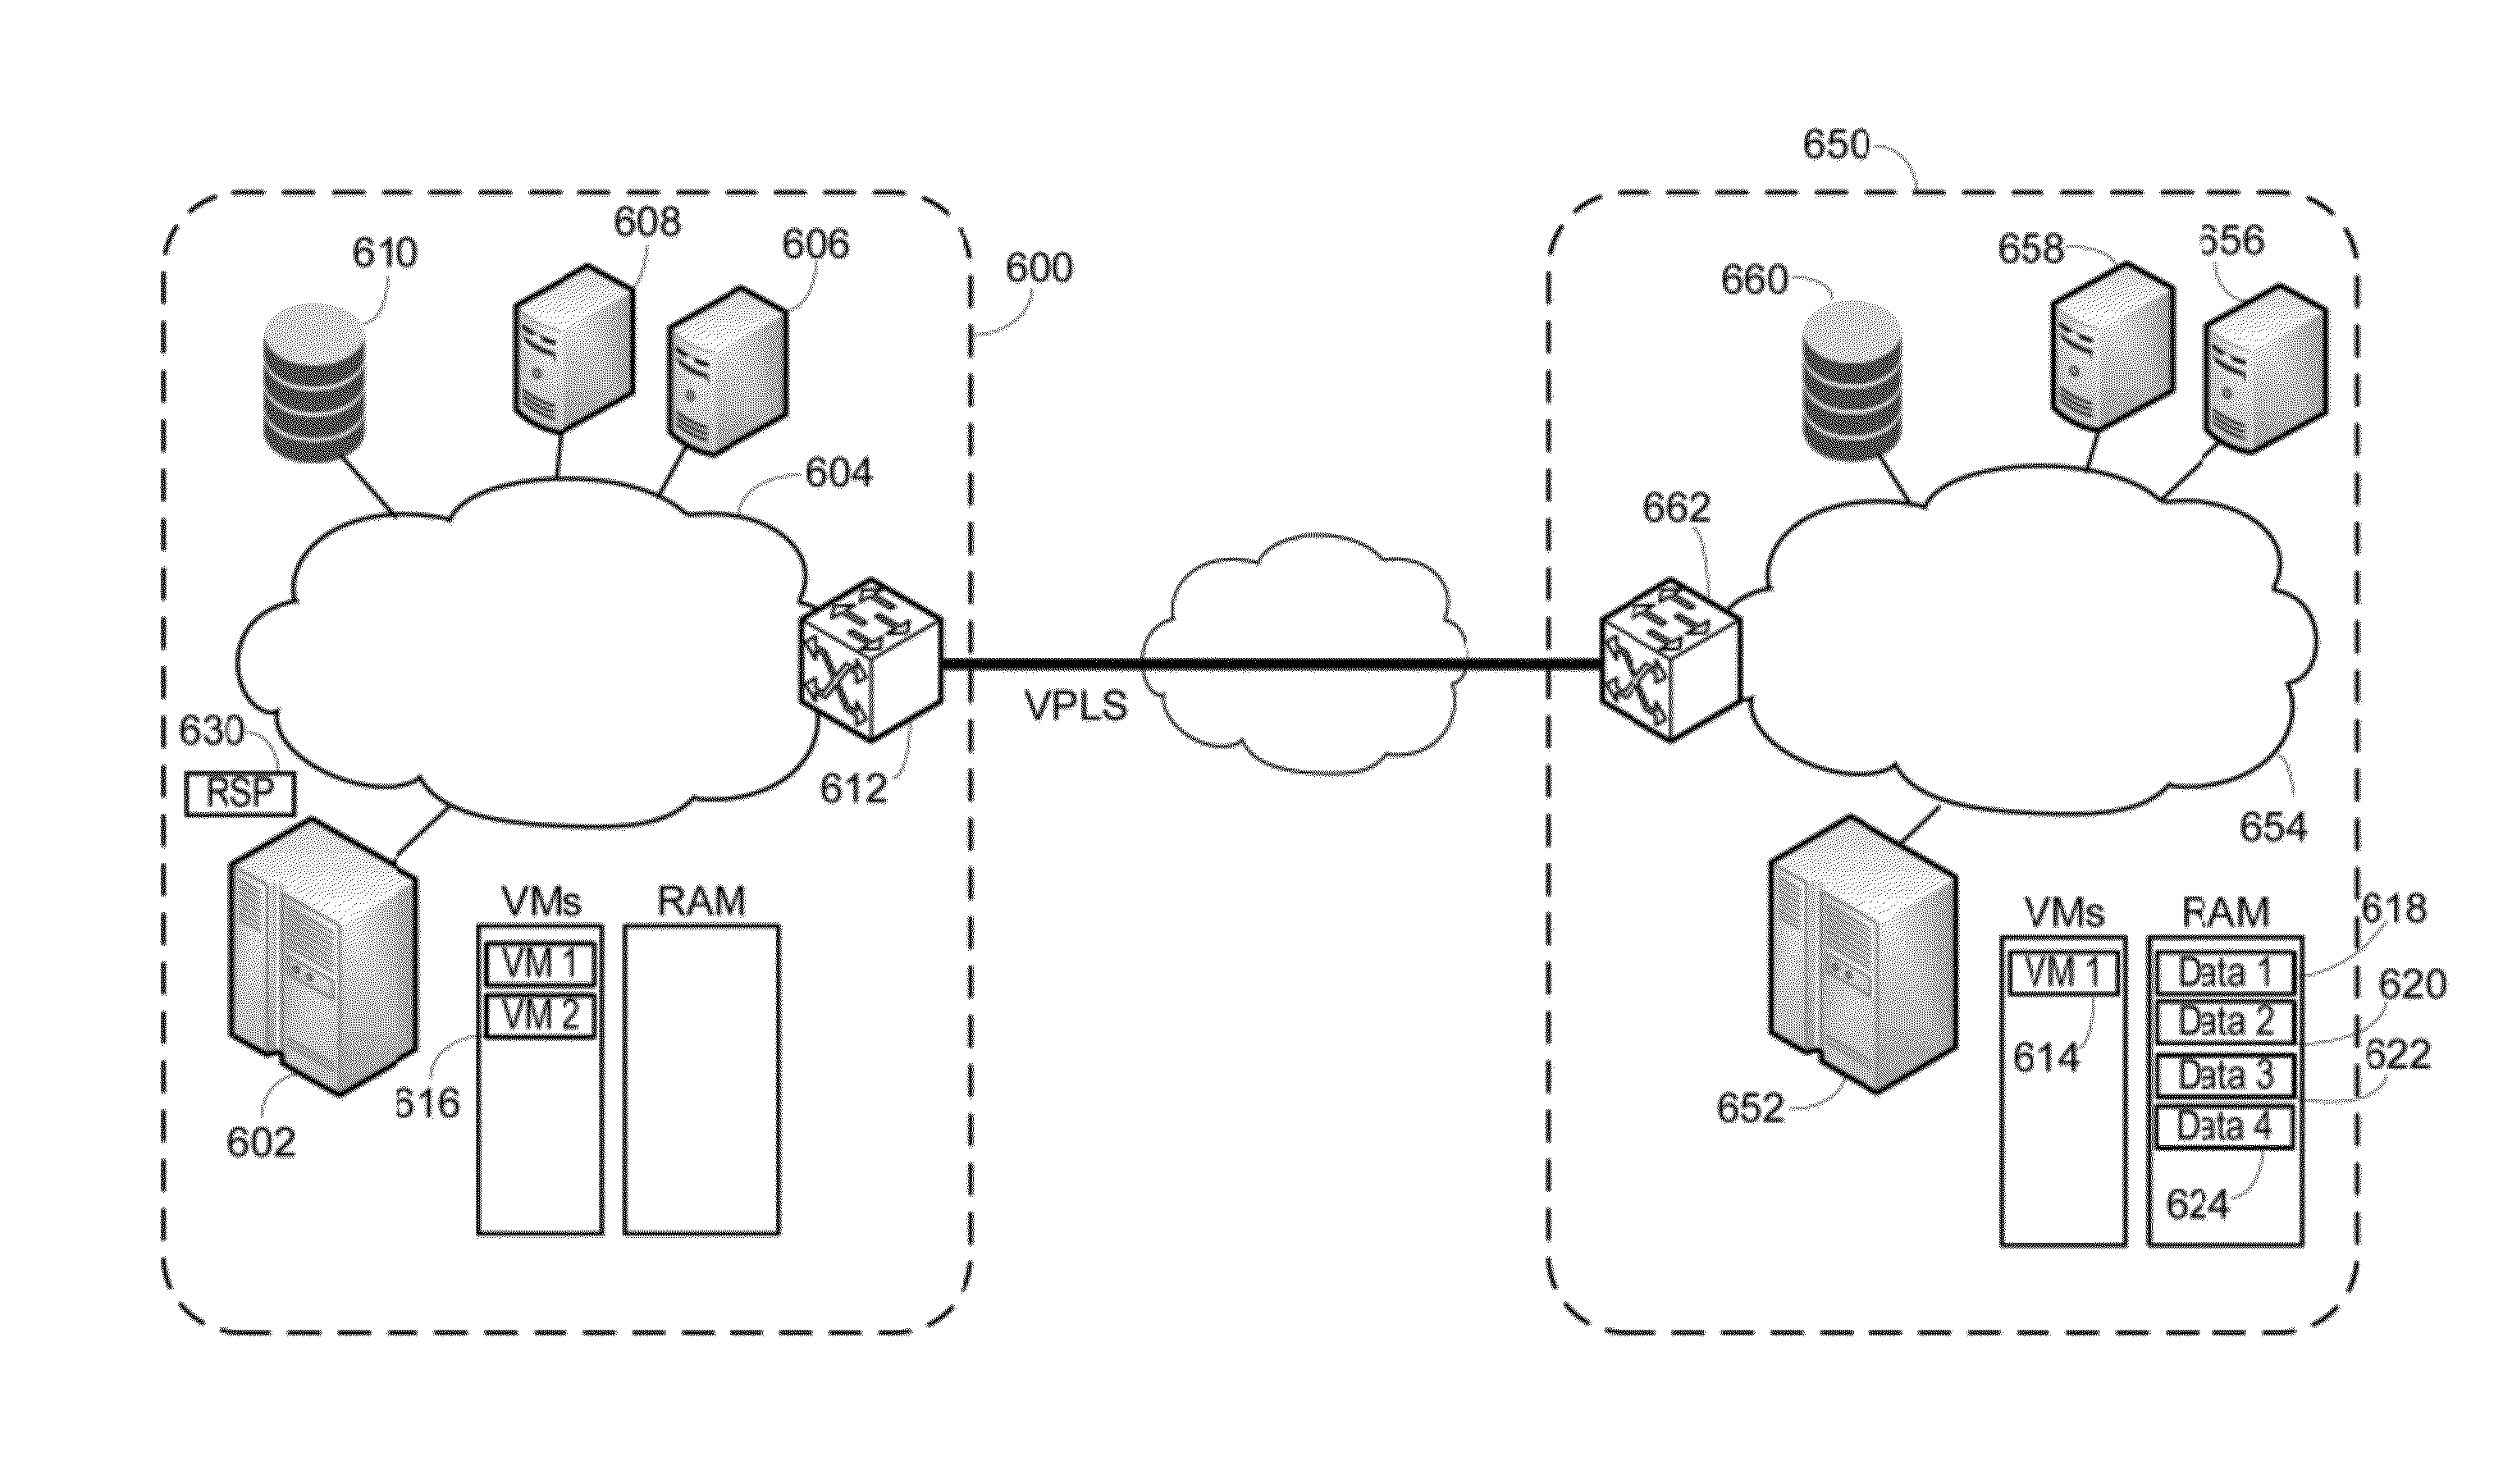 Virtual machine and application movement over a wide area network